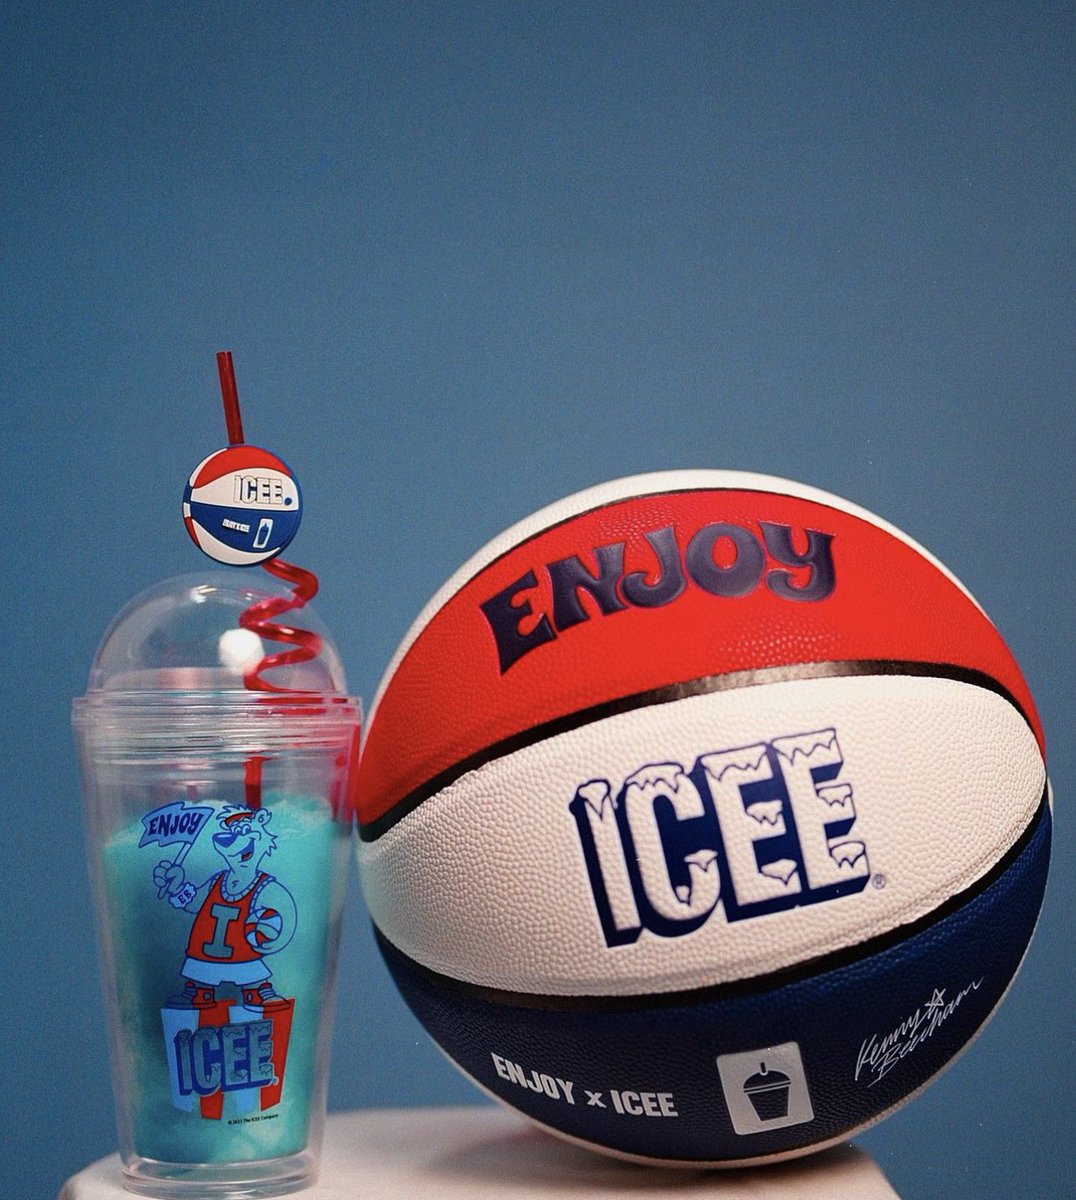 🚨THE ENJOY x ICEE COLLAB IS OFFICIALLY LIVE FOR SALE 🚨 @EnjoyBBall 🥶